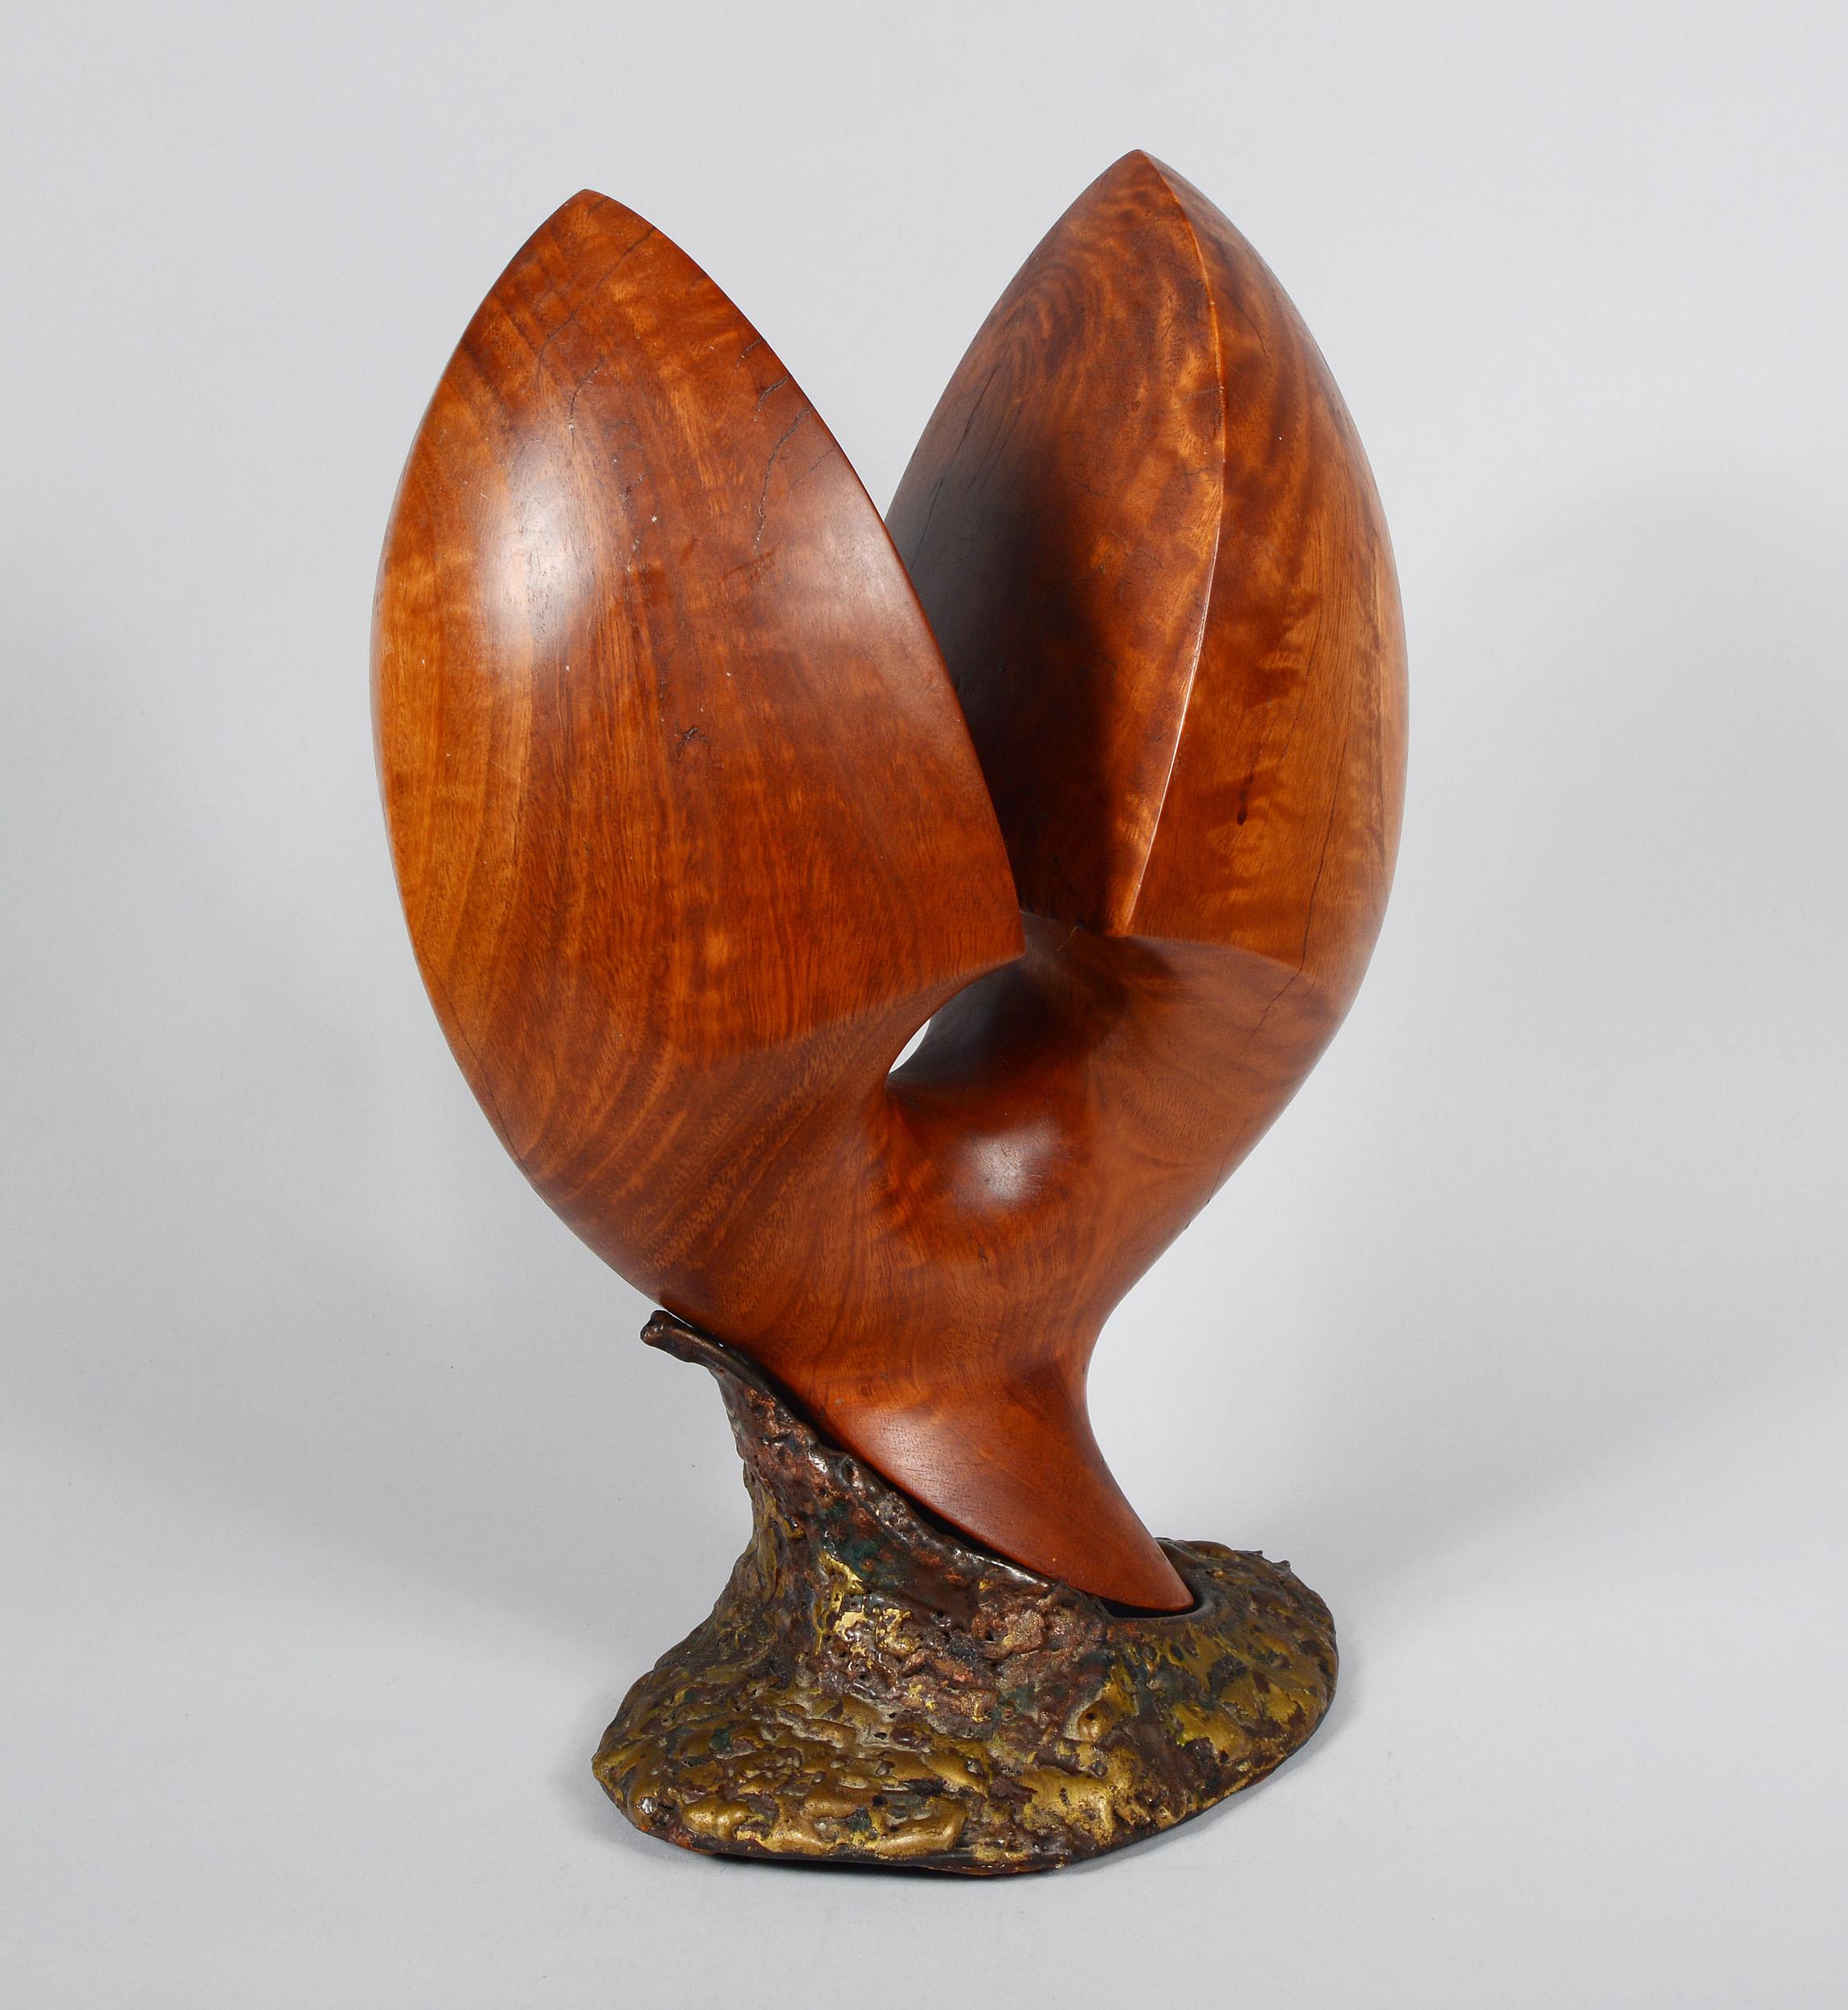 Carved wood sculpture with a Brutalist metal base. This is one of a group of sculptures we acquired by an anonymous artist. This dates to the 1950s-1960s. The sculpture is not signed.